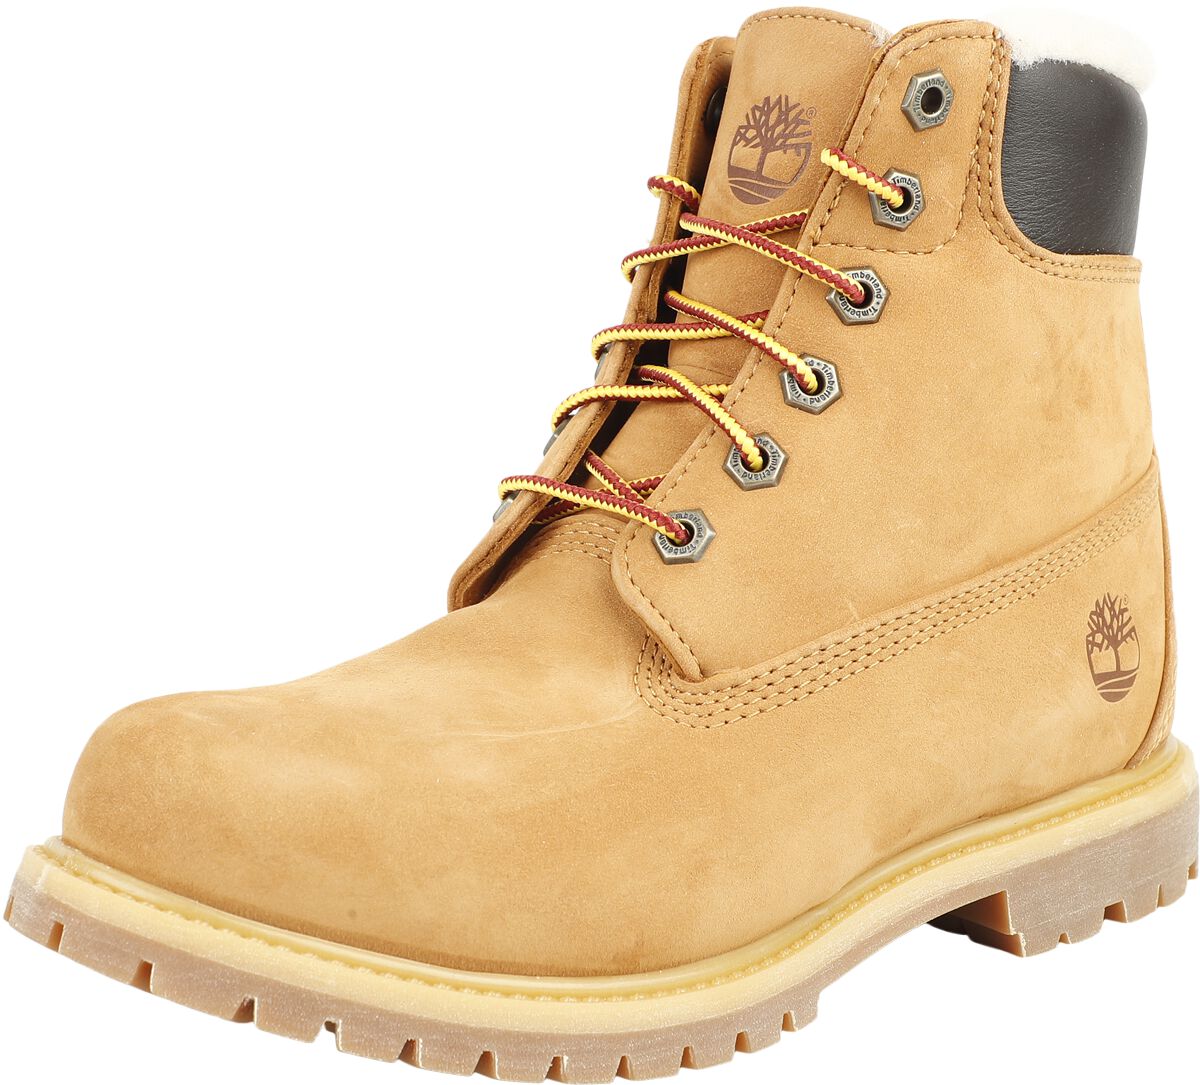 Timberland 6 Inch Premium Shearling Lined WP Boot Boot braun in EU38 von Timberland